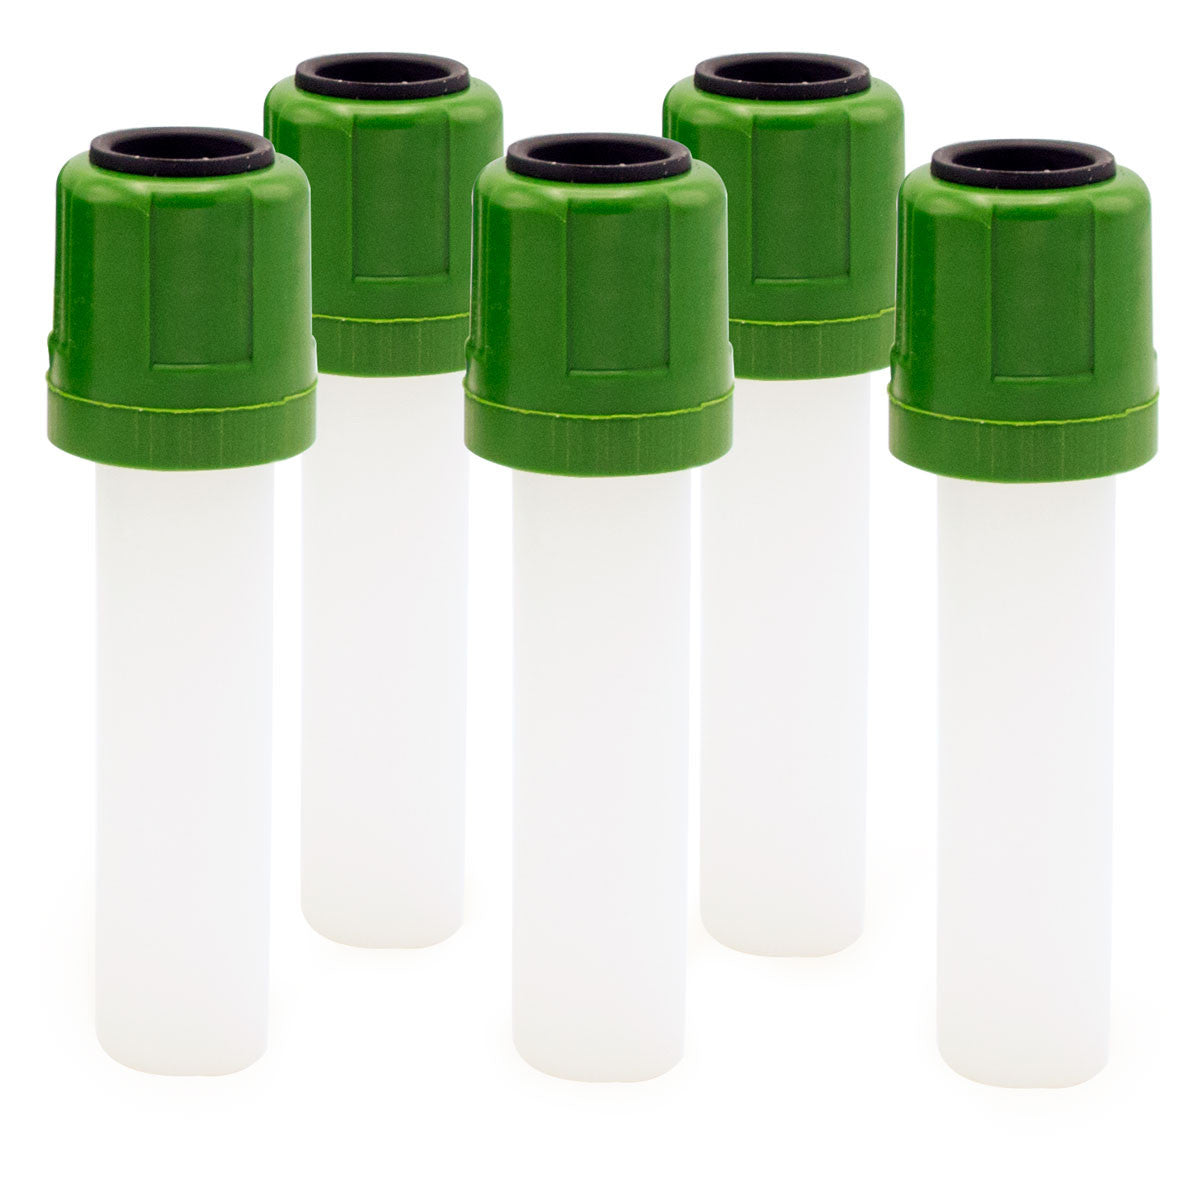 Hanna Protective cap for pH probes 5 pack - HI740200